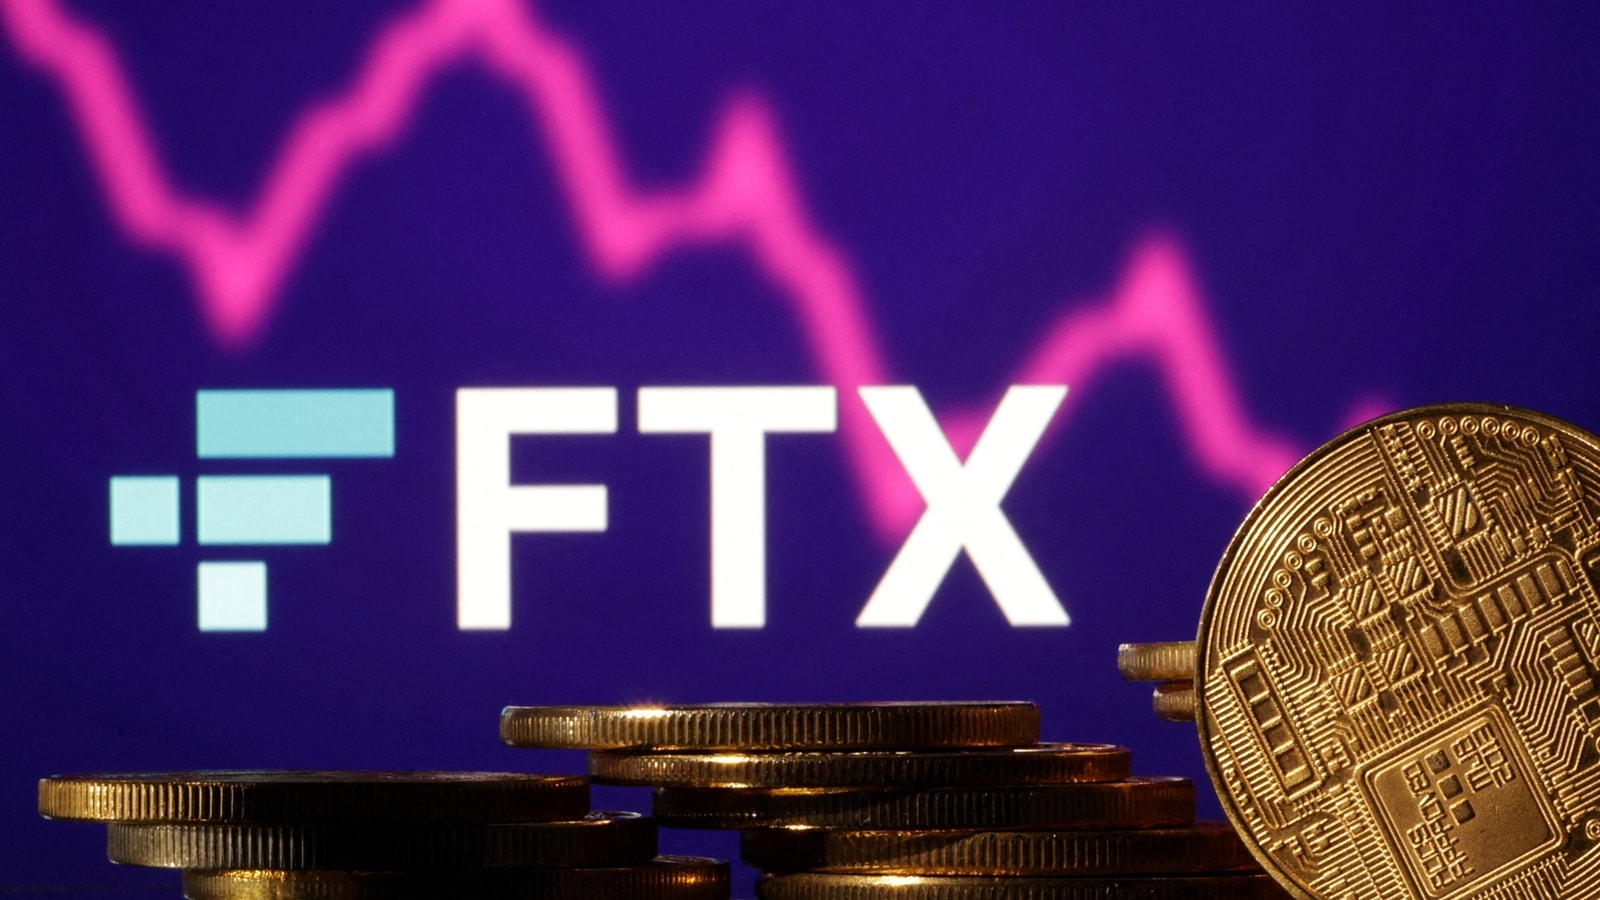 ftx crypto wallets mysterious latenight outflows